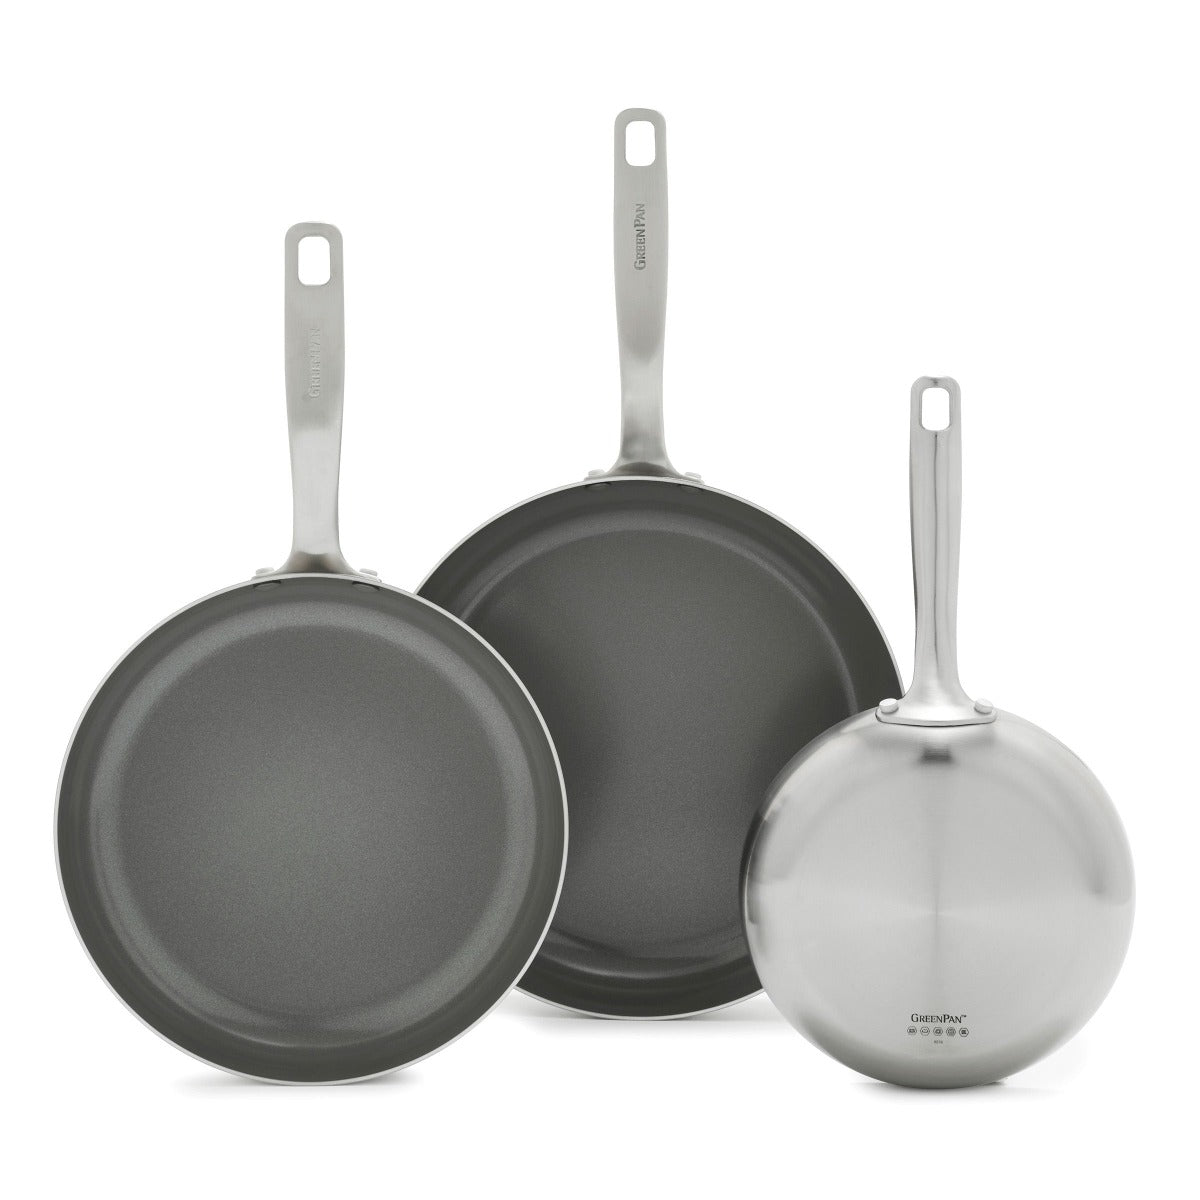 Chatham Ceramic Nonstick 8 and 10 Frypan Set